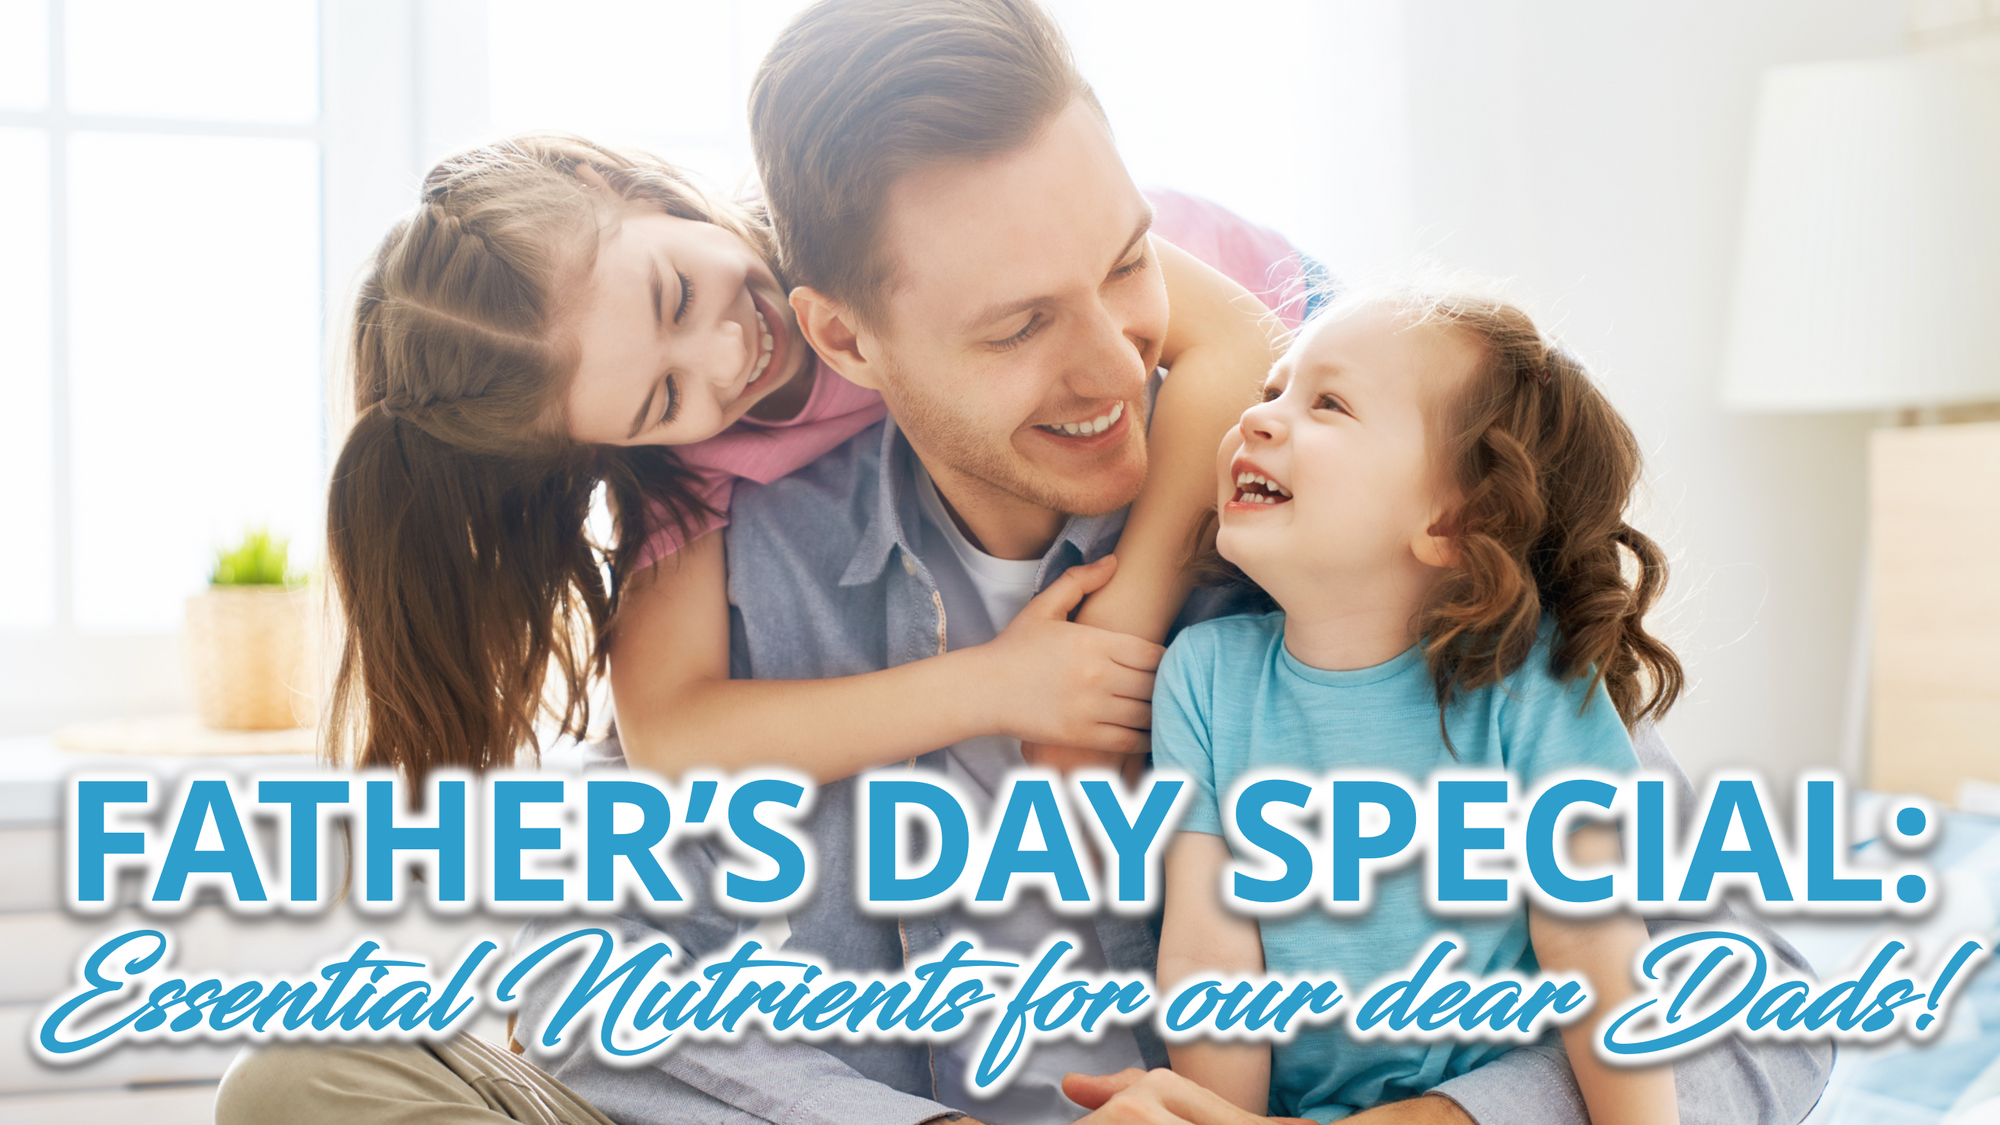 A  Father with his two daughters and a text "Father's Day Special: Essential Nutrients for our Dads!